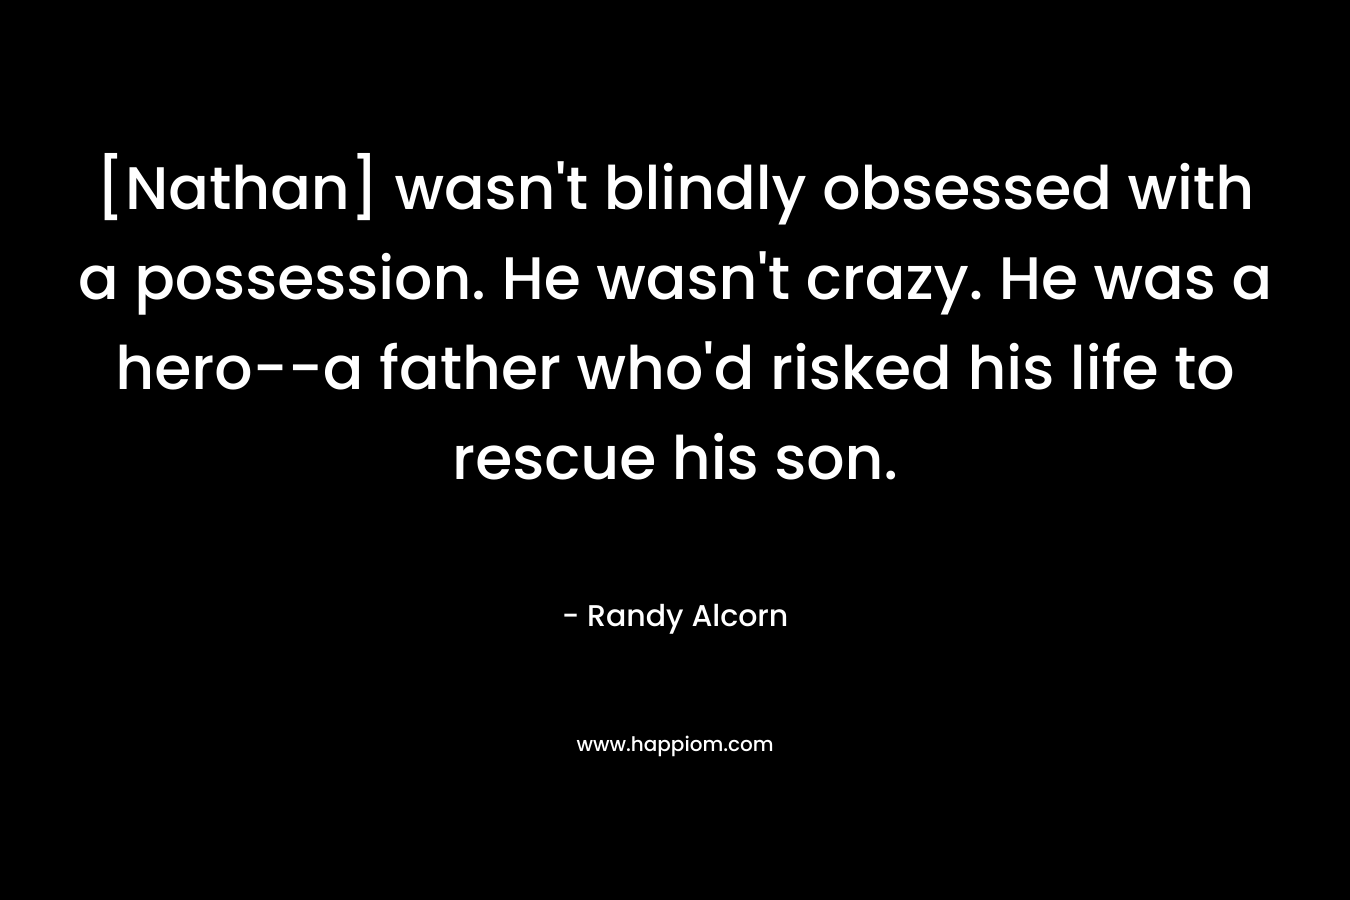 [Nathan] wasn’t blindly obsessed with a possession. He wasn’t crazy. He was a hero–a father who’d risked his life to rescue his son. – Randy Alcorn